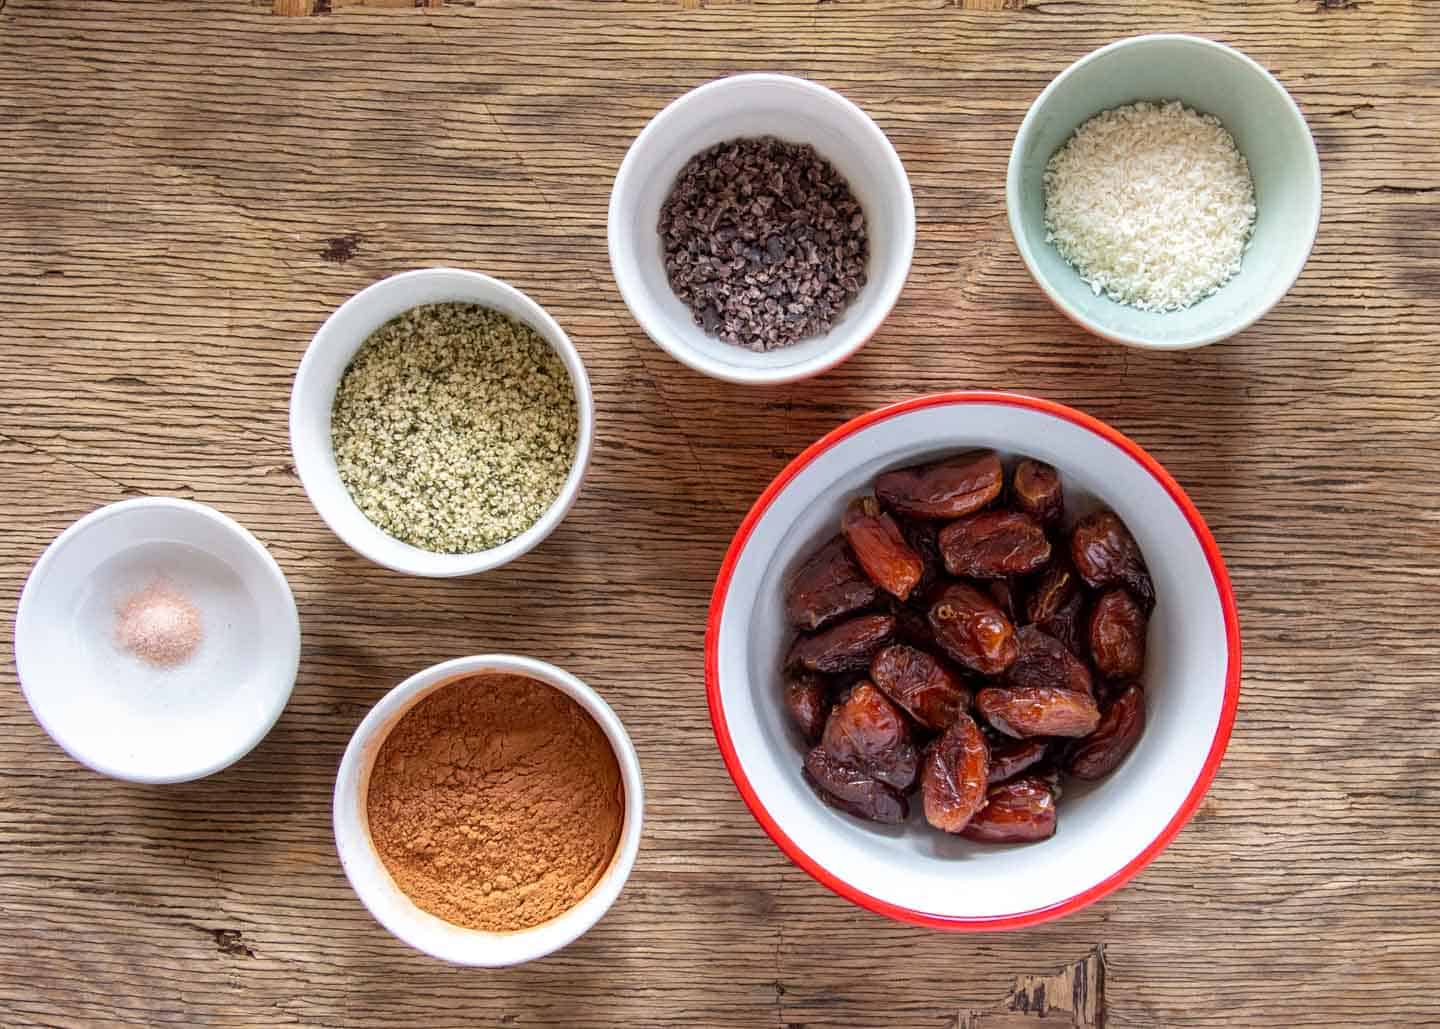 Ingredients for Raw Date Bars: Dates, Hemp, Cacao Powder, Cacao Nibs, Coconut, Salt